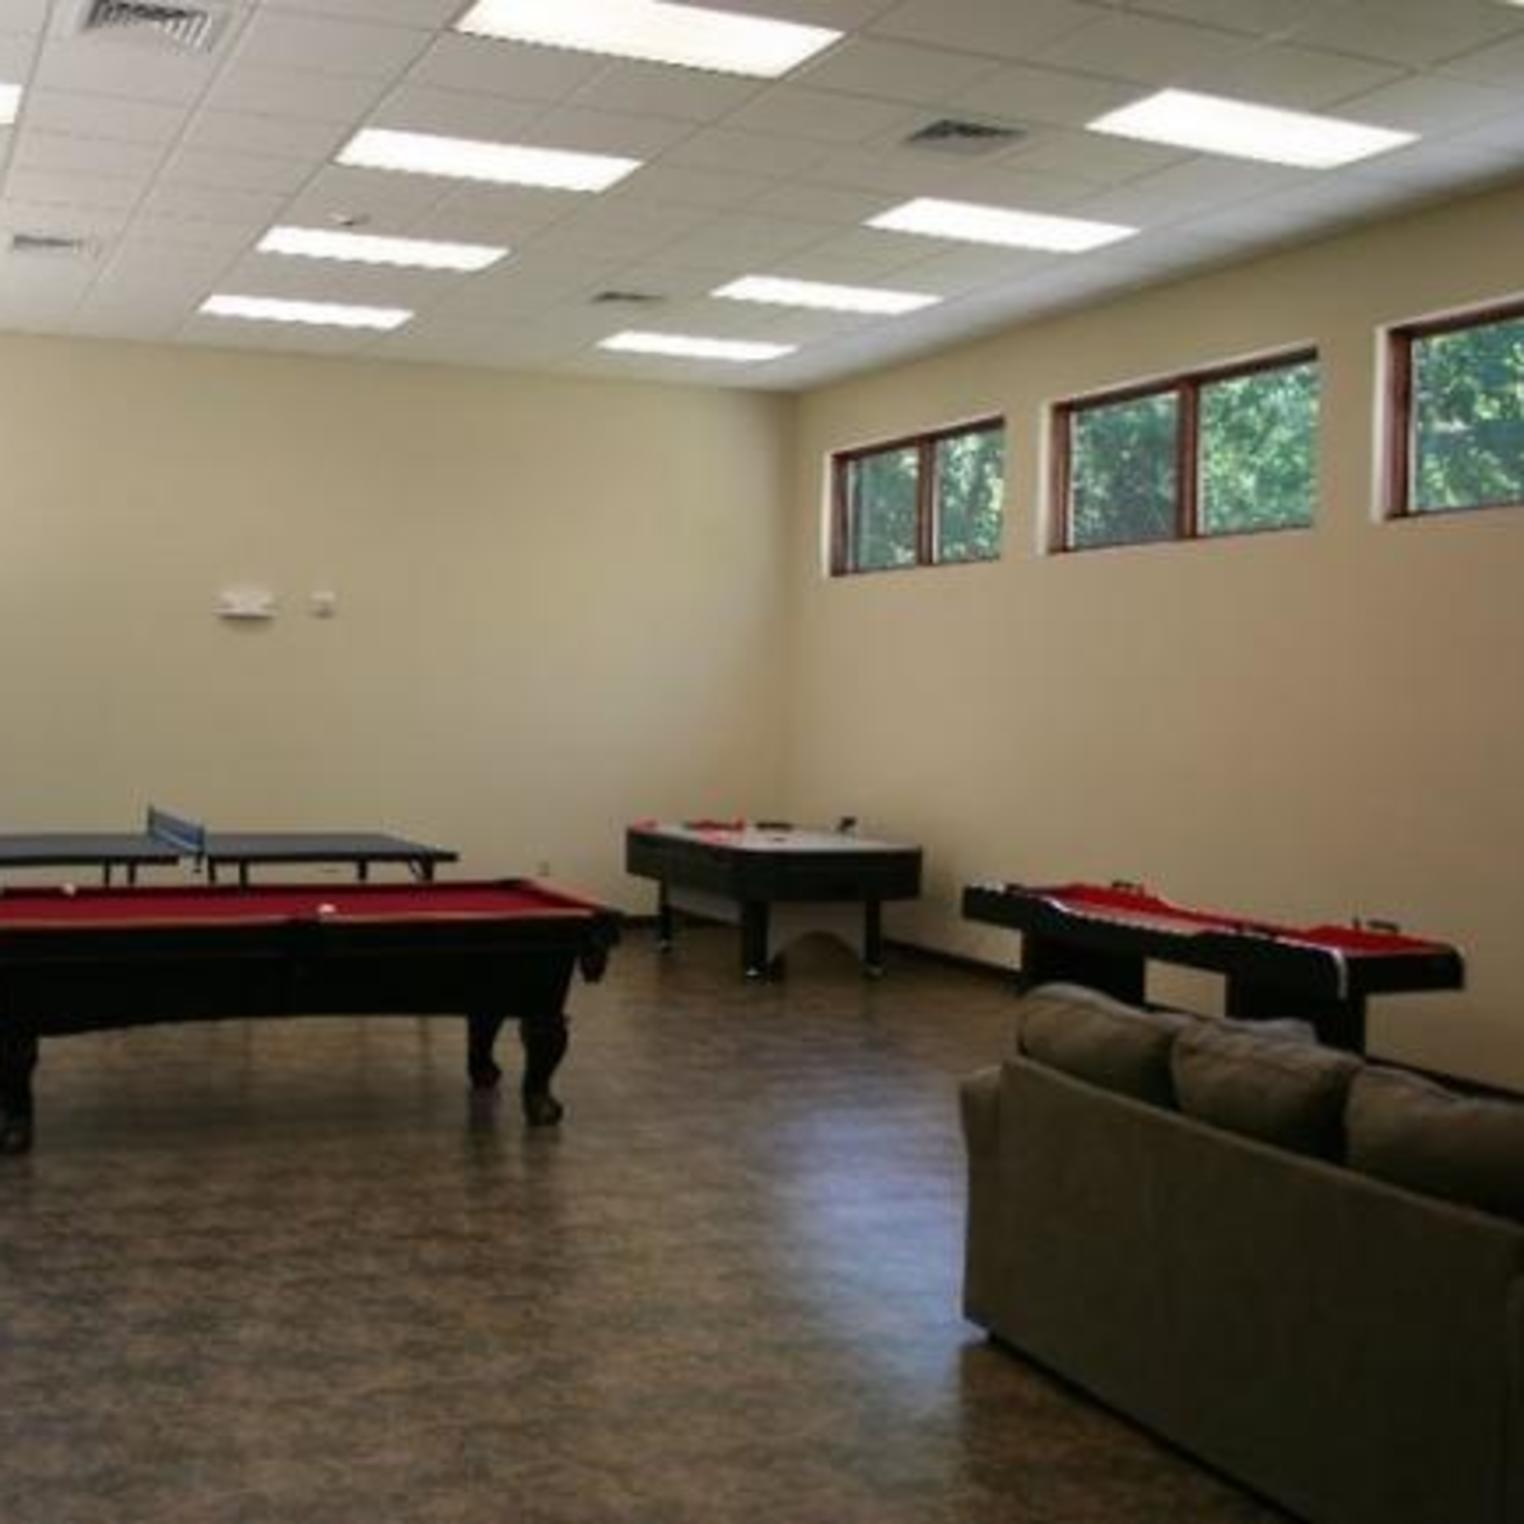 Game Room in the Asbury Lodge at Mount Asbury Retreat Center